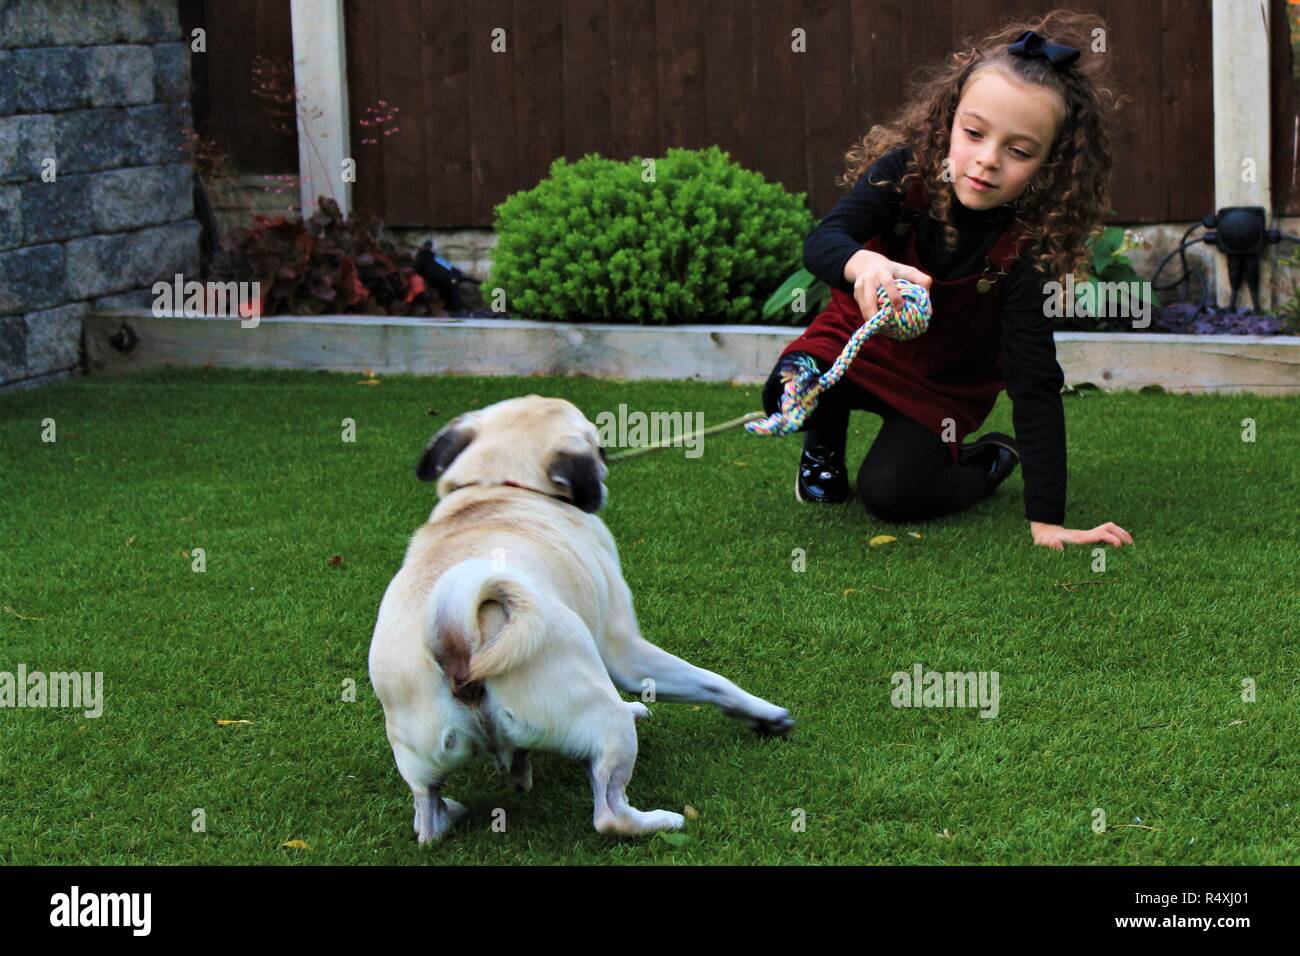 Young Caucasian girl playing with a Pug dog in a garden Stock Photo